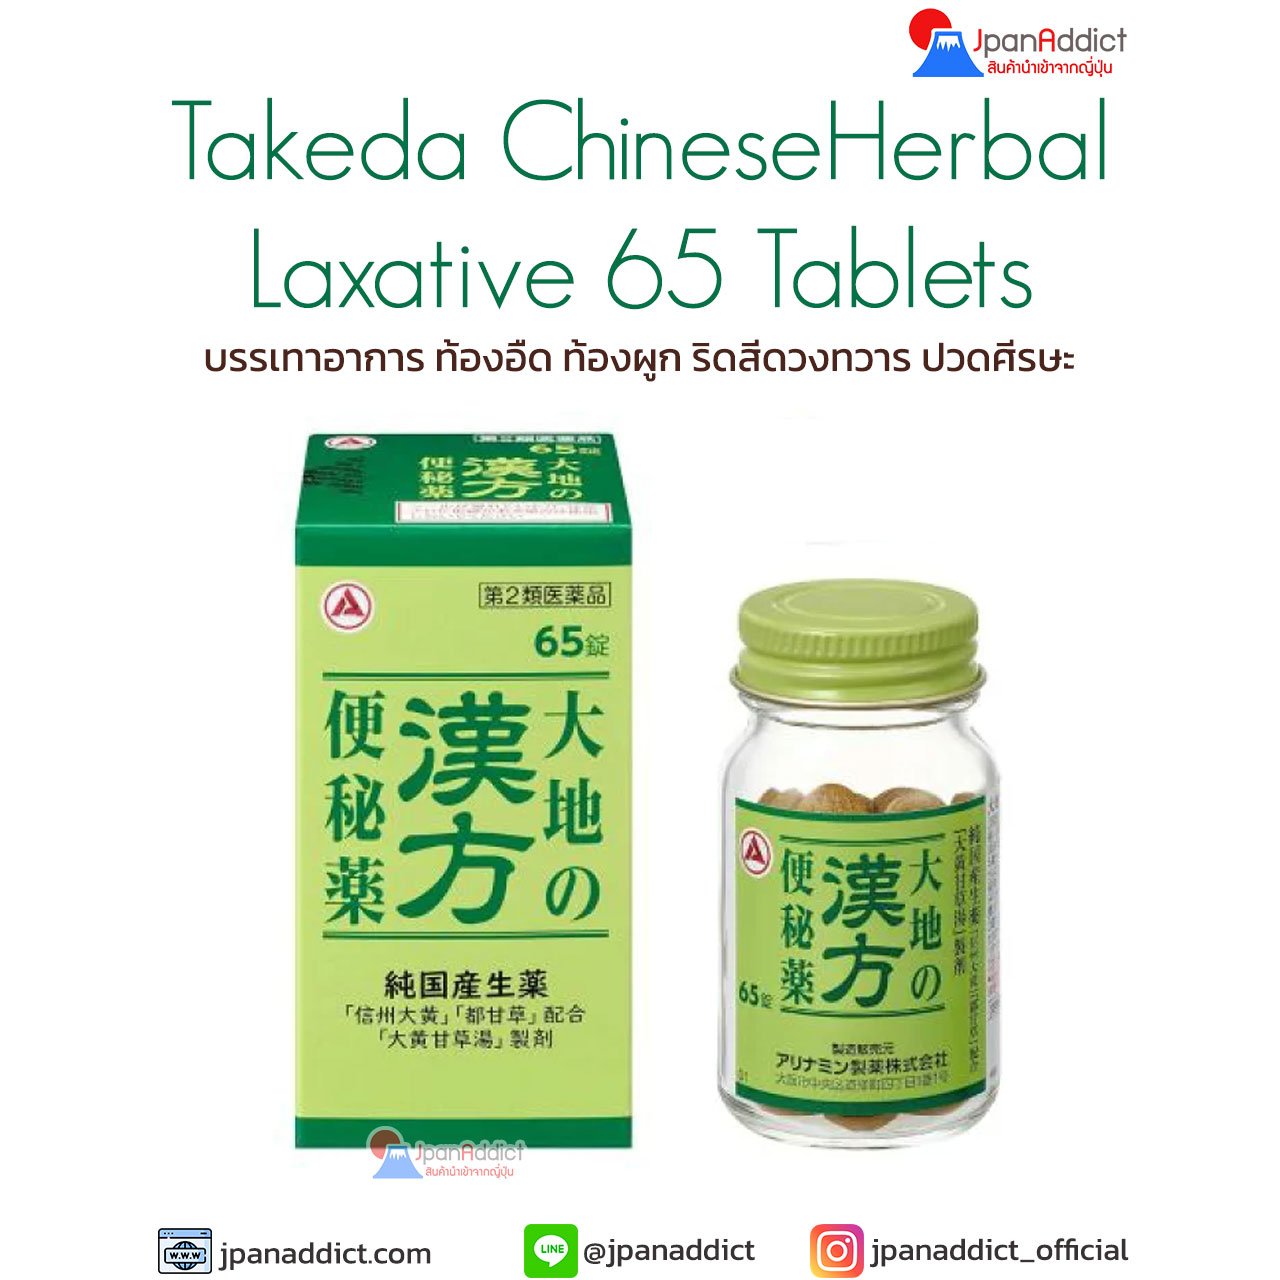 Takeda ChineseHerbal Laxative 65 Tablets